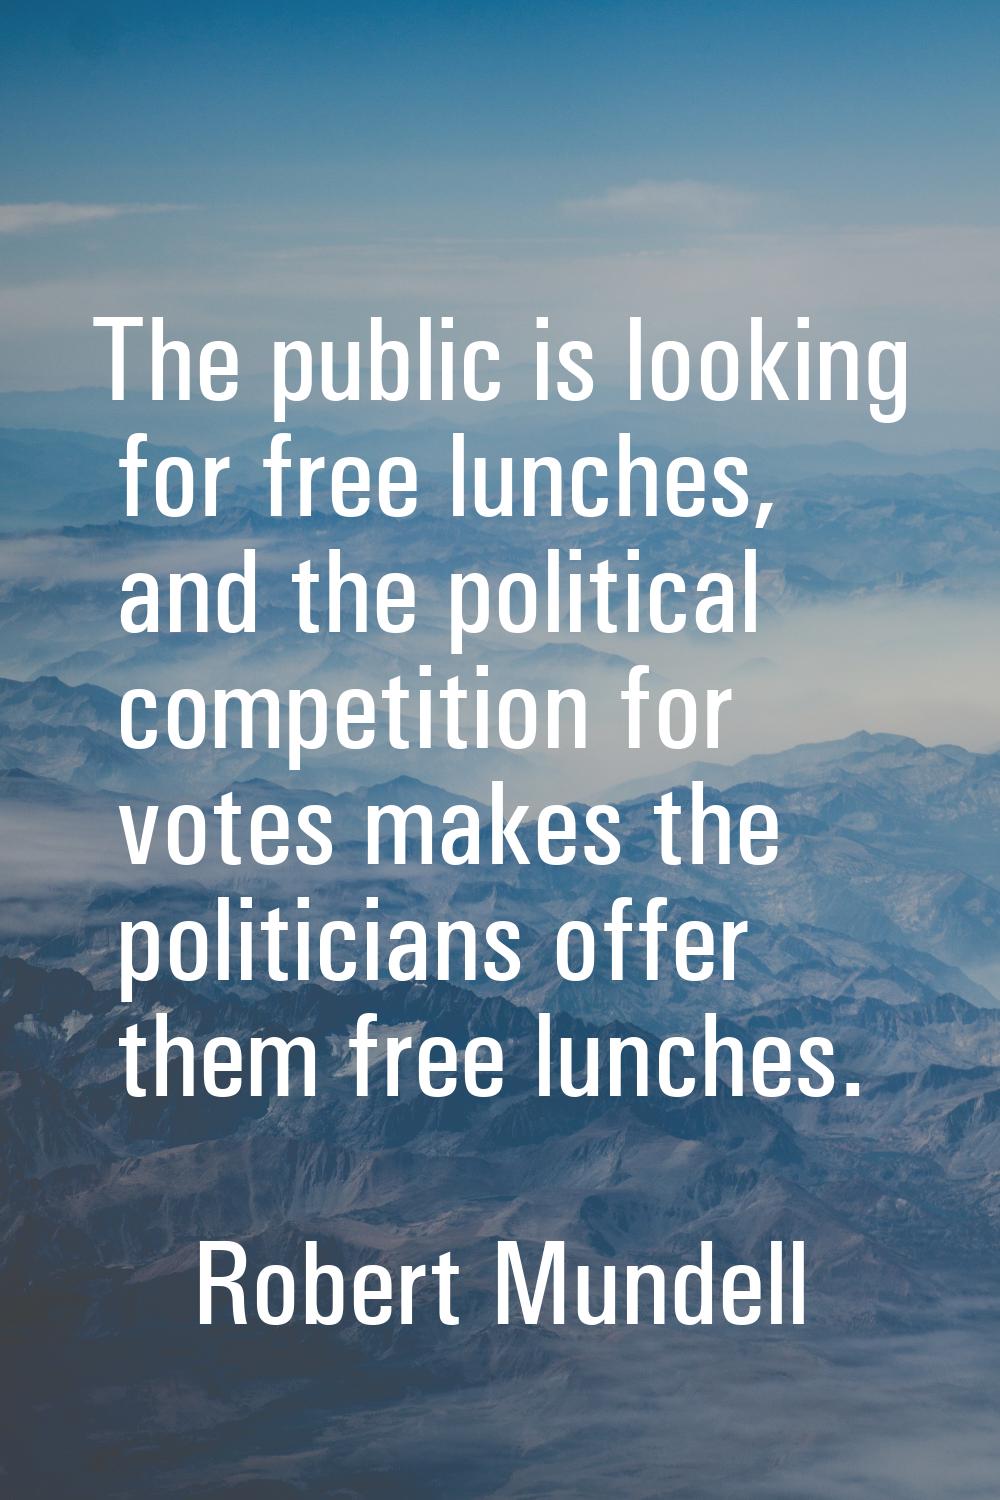 The public is looking for free lunches, and the political competition for votes makes the politicia